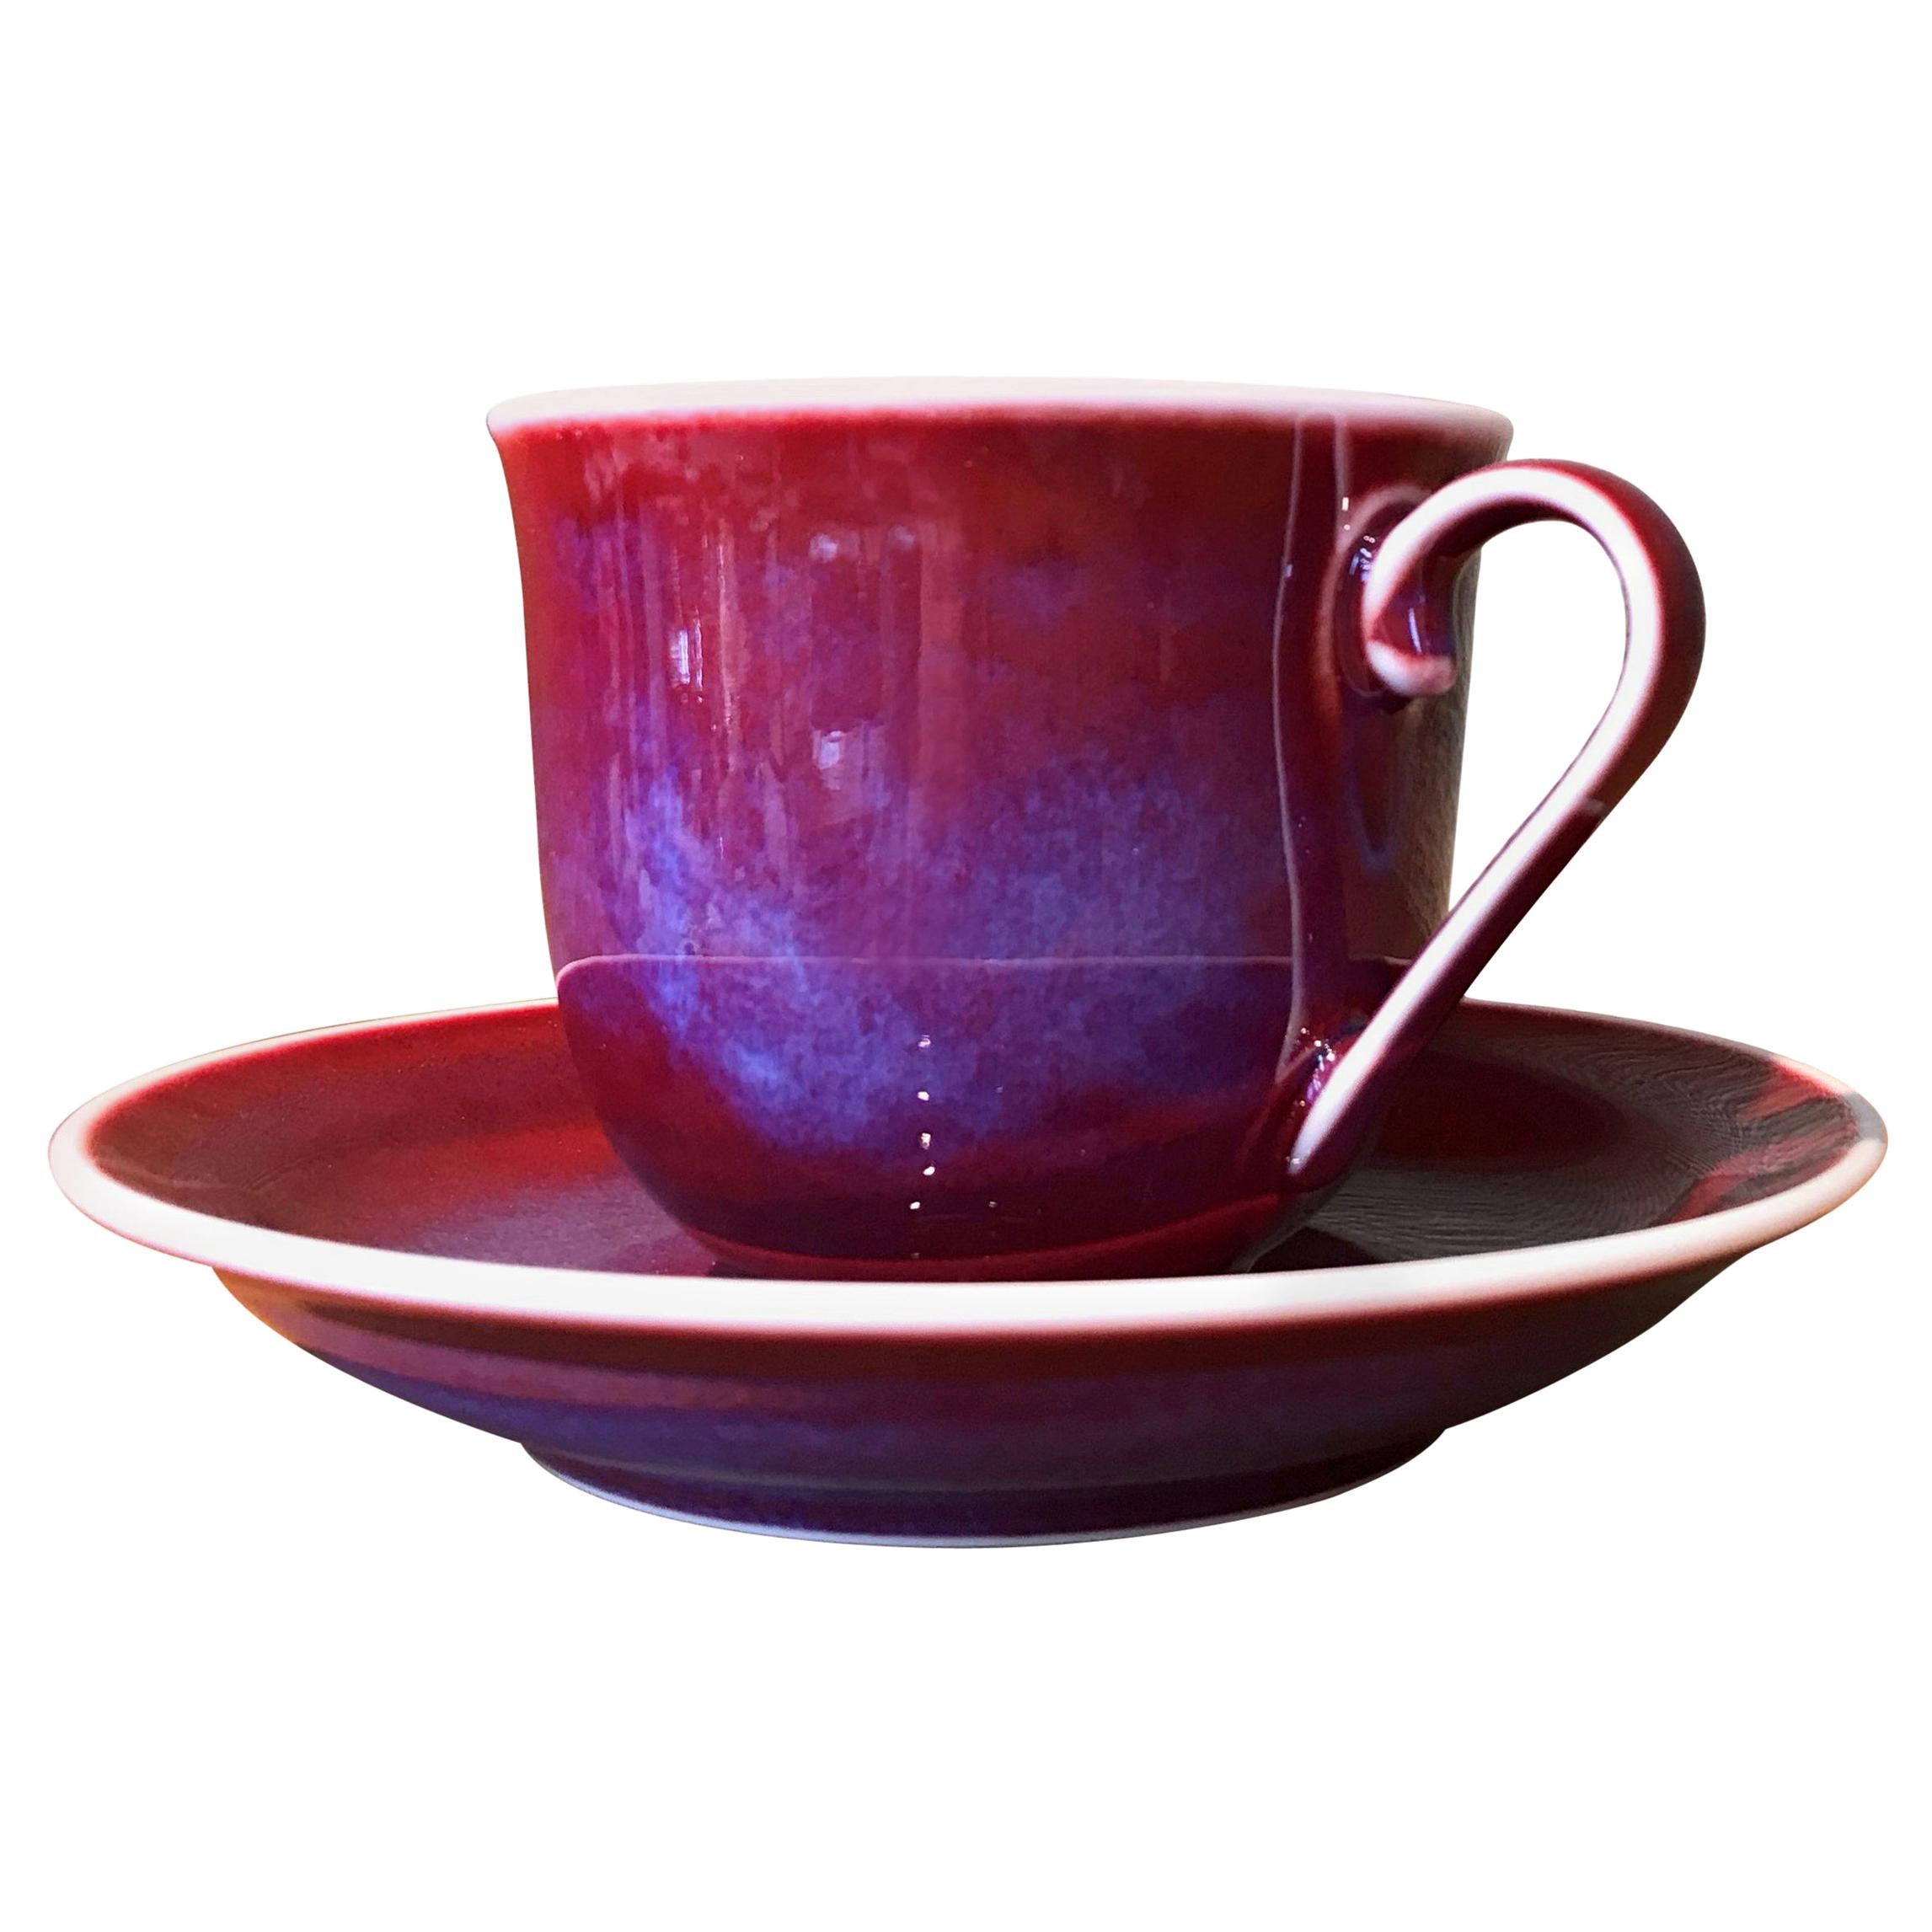 Japanese Hand-Glazed Red Blue Porcelain Cup and Saucer by Master Artist